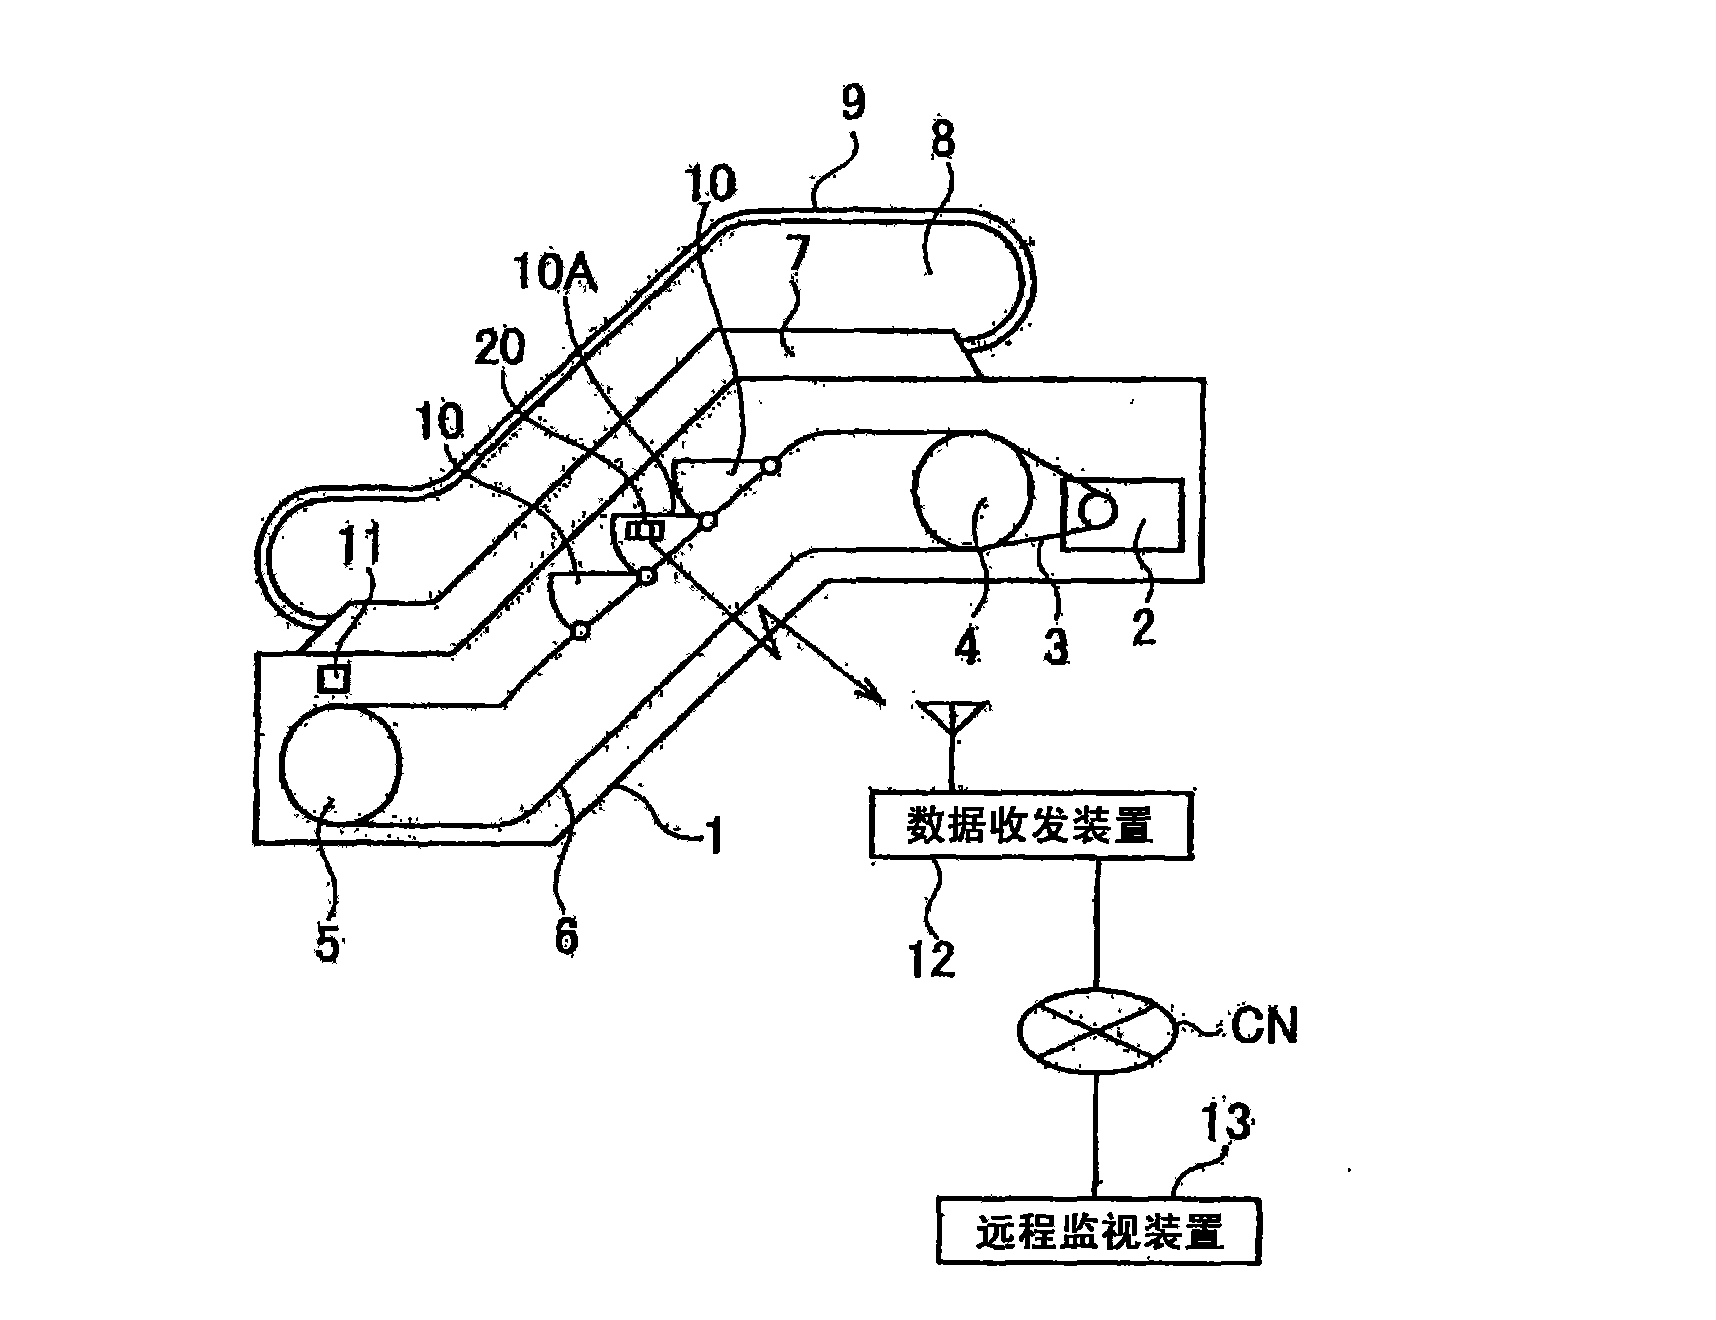 Passenger conveyer abnormality diagnosis system